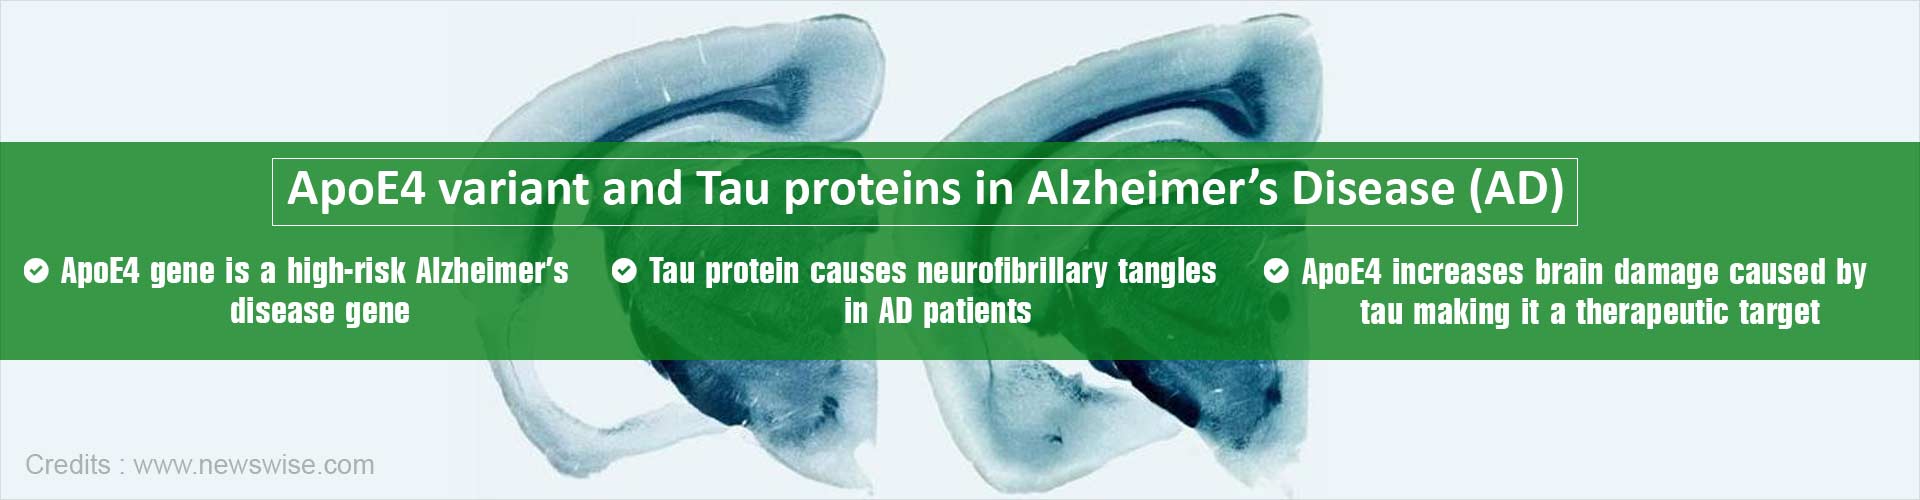 ApoE4 variant and Tau proteins in Alzheimer''s Disease (AD)
- ApoE4 gene is a high-risk Alzheimer''s Disease gene
- Tau protein causes neurofibrillary tangles in AD patients
- ApoE4 increases brain damage caused by tau making it a therapeutic target